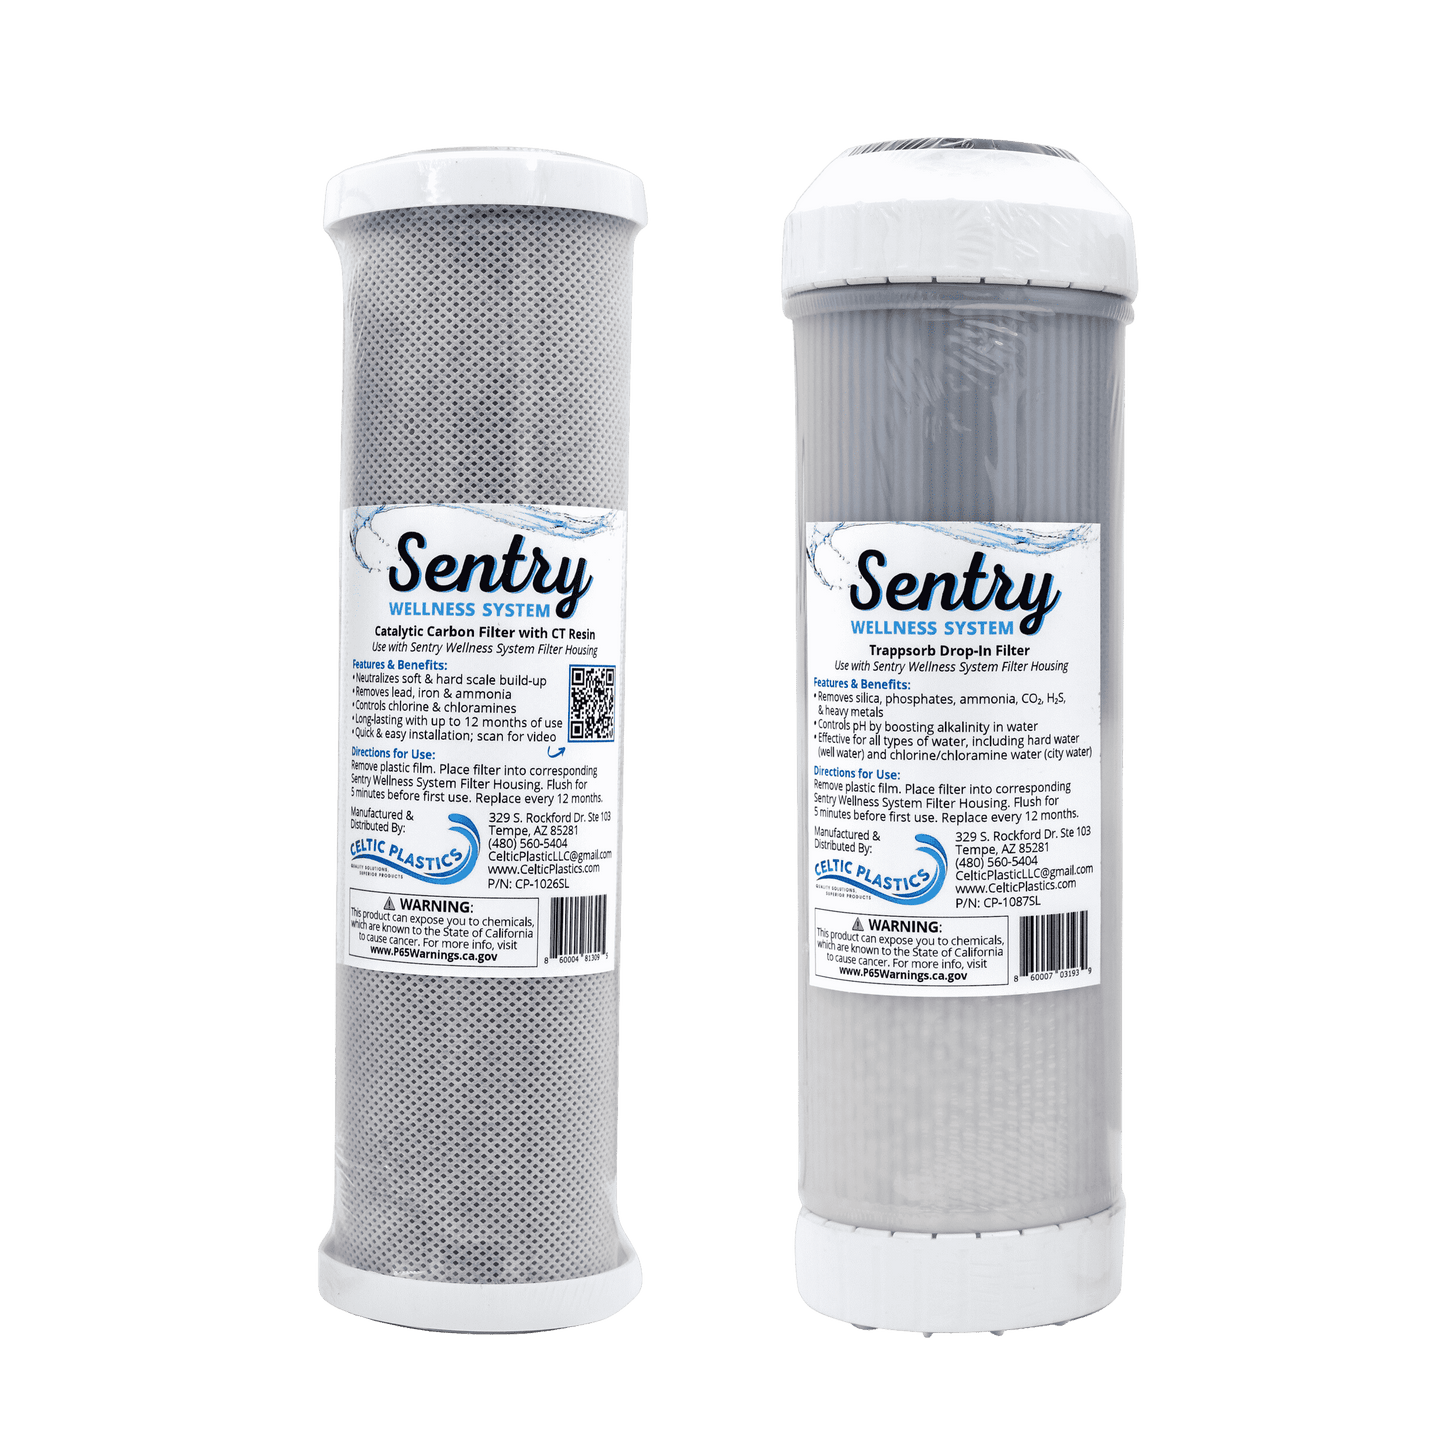 Sentry Wellness System - Carbon & Trappsorb Filters